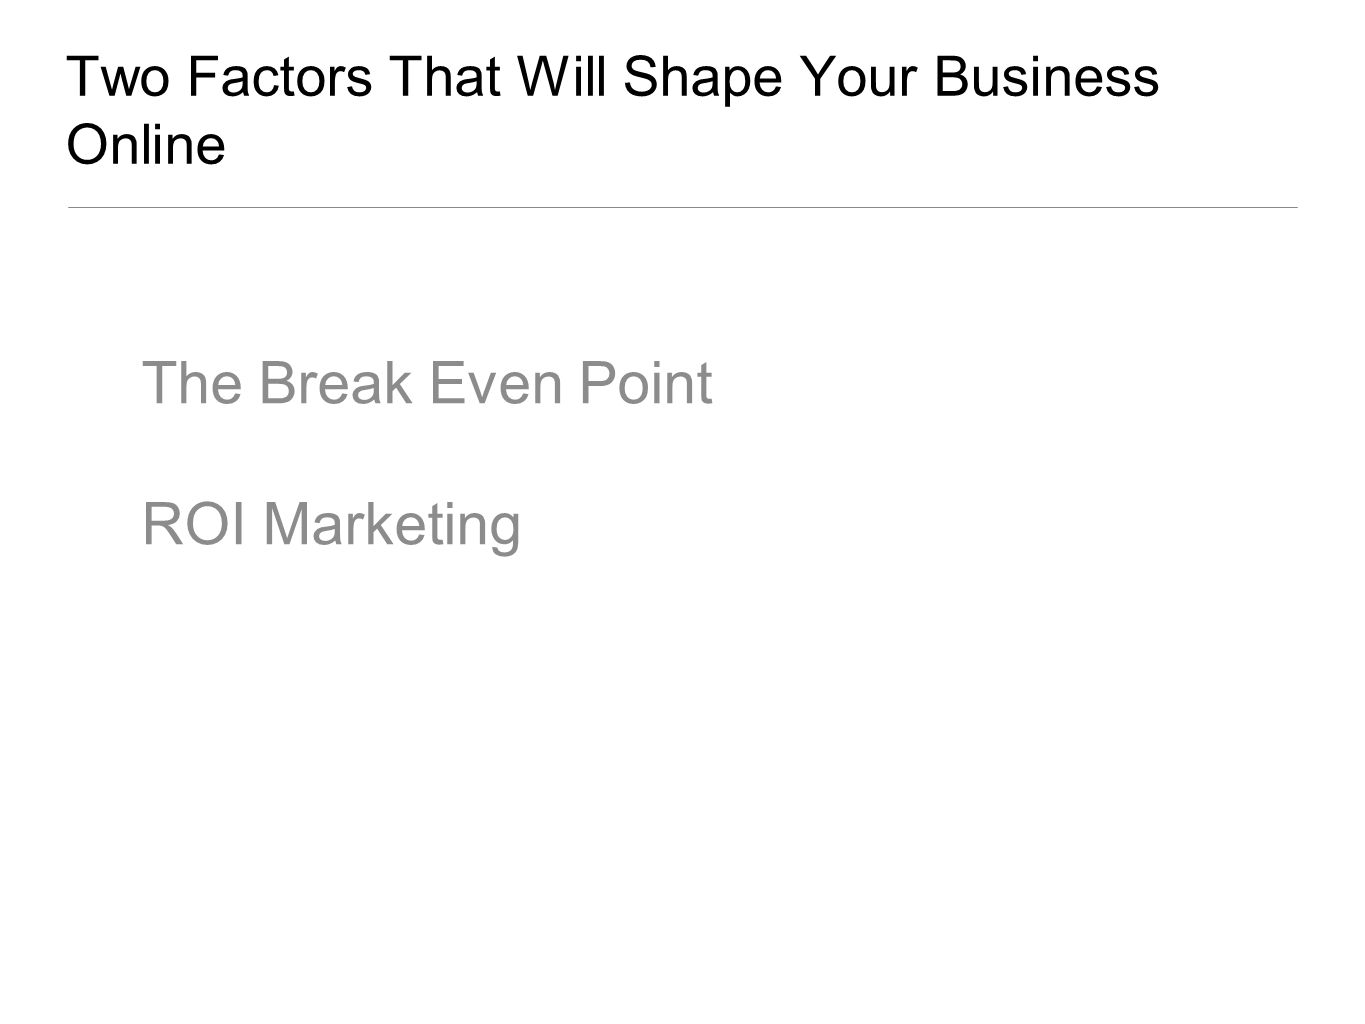 Two Factors That Will Shape Your Business Online The Break Even Point ROI Marketing